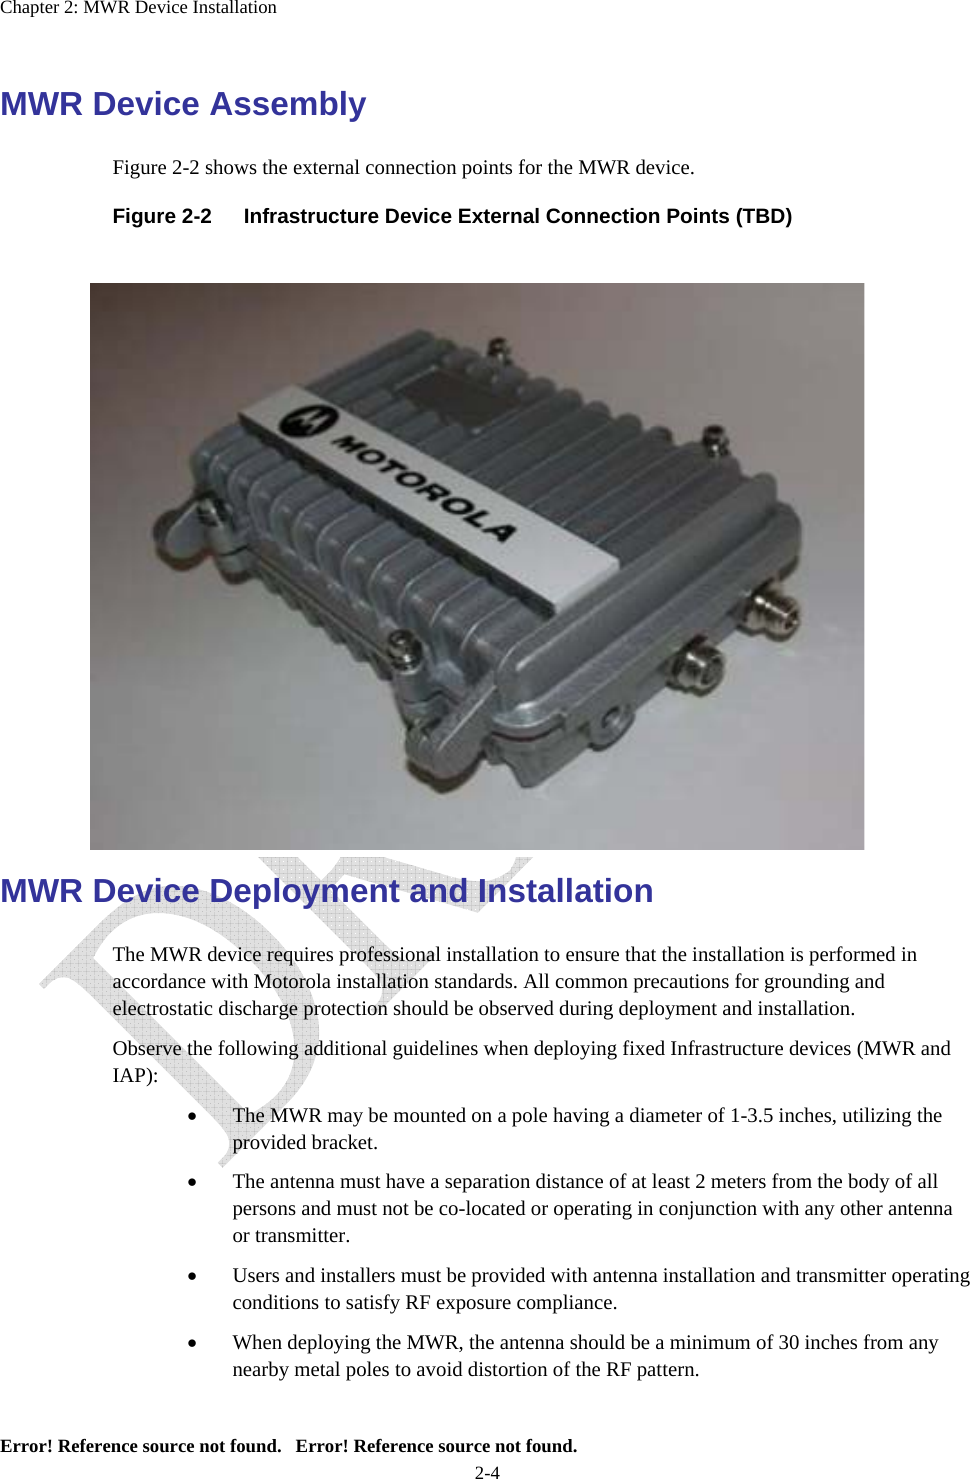 Chapter 2: MWR Device Installation Error! Reference source not found.   Error! Reference source not found. 2-4 MWR Device Assembly  Figure 2-2 shows the external connection points for the MWR device.  Figure 2-2  Infrastructure Device External Connection Points (TBD)                     MWR Device Deployment and Installation The MWR device requires professional installation to ensure that the installation is performed in accordance with Motorola installation standards. All common precautions for grounding and electrostatic discharge protection should be observed during deployment and installation. Observe the following additional guidelines when deploying fixed Infrastructure devices (MWR and IAP): • The MWR may be mounted on a pole having a diameter of 1-3.5 inches, utilizing the provided bracket.   • The antenna must have a separation distance of at least 2 meters from the body of all persons and must not be co-located or operating in conjunction with any other antenna or transmitter.   • Users and installers must be provided with antenna installation and transmitter operating conditions to satisfy RF exposure compliance. • When deploying the MWR, the antenna should be a minimum of 30 inches from any nearby metal poles to avoid distortion of the RF pattern. 